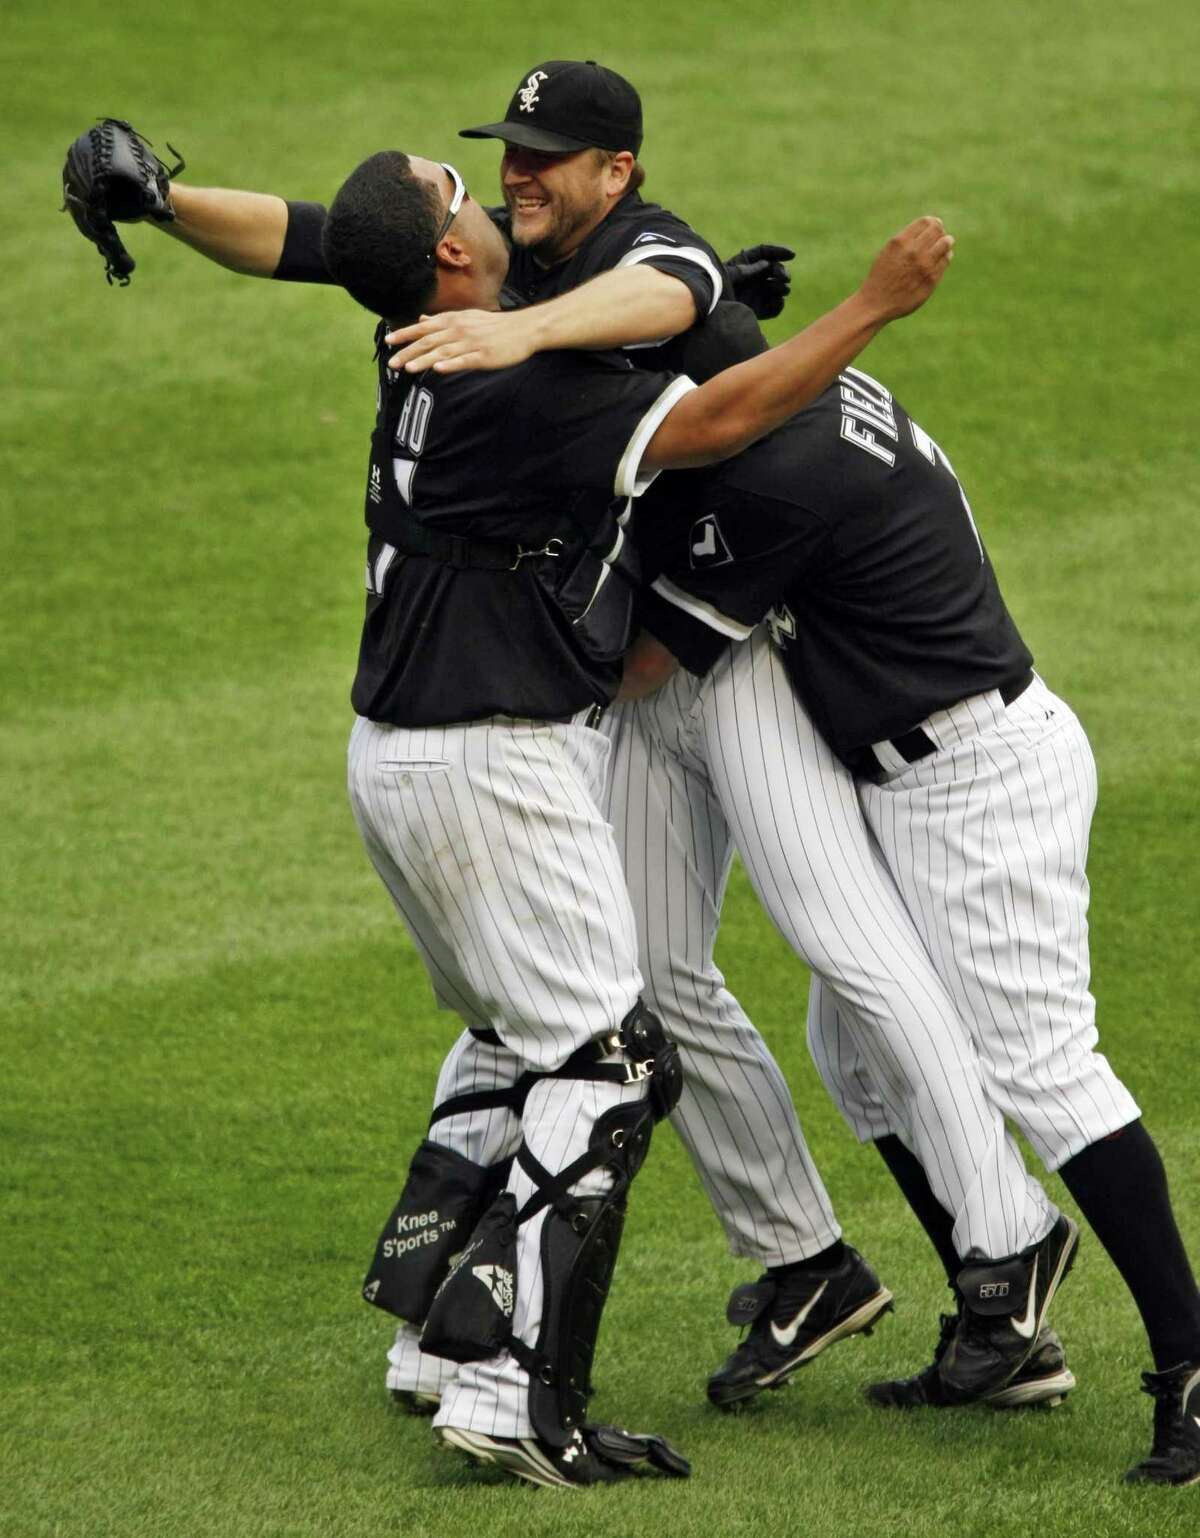 Perfection: Sox' Mark Buehrle pitches perfect game